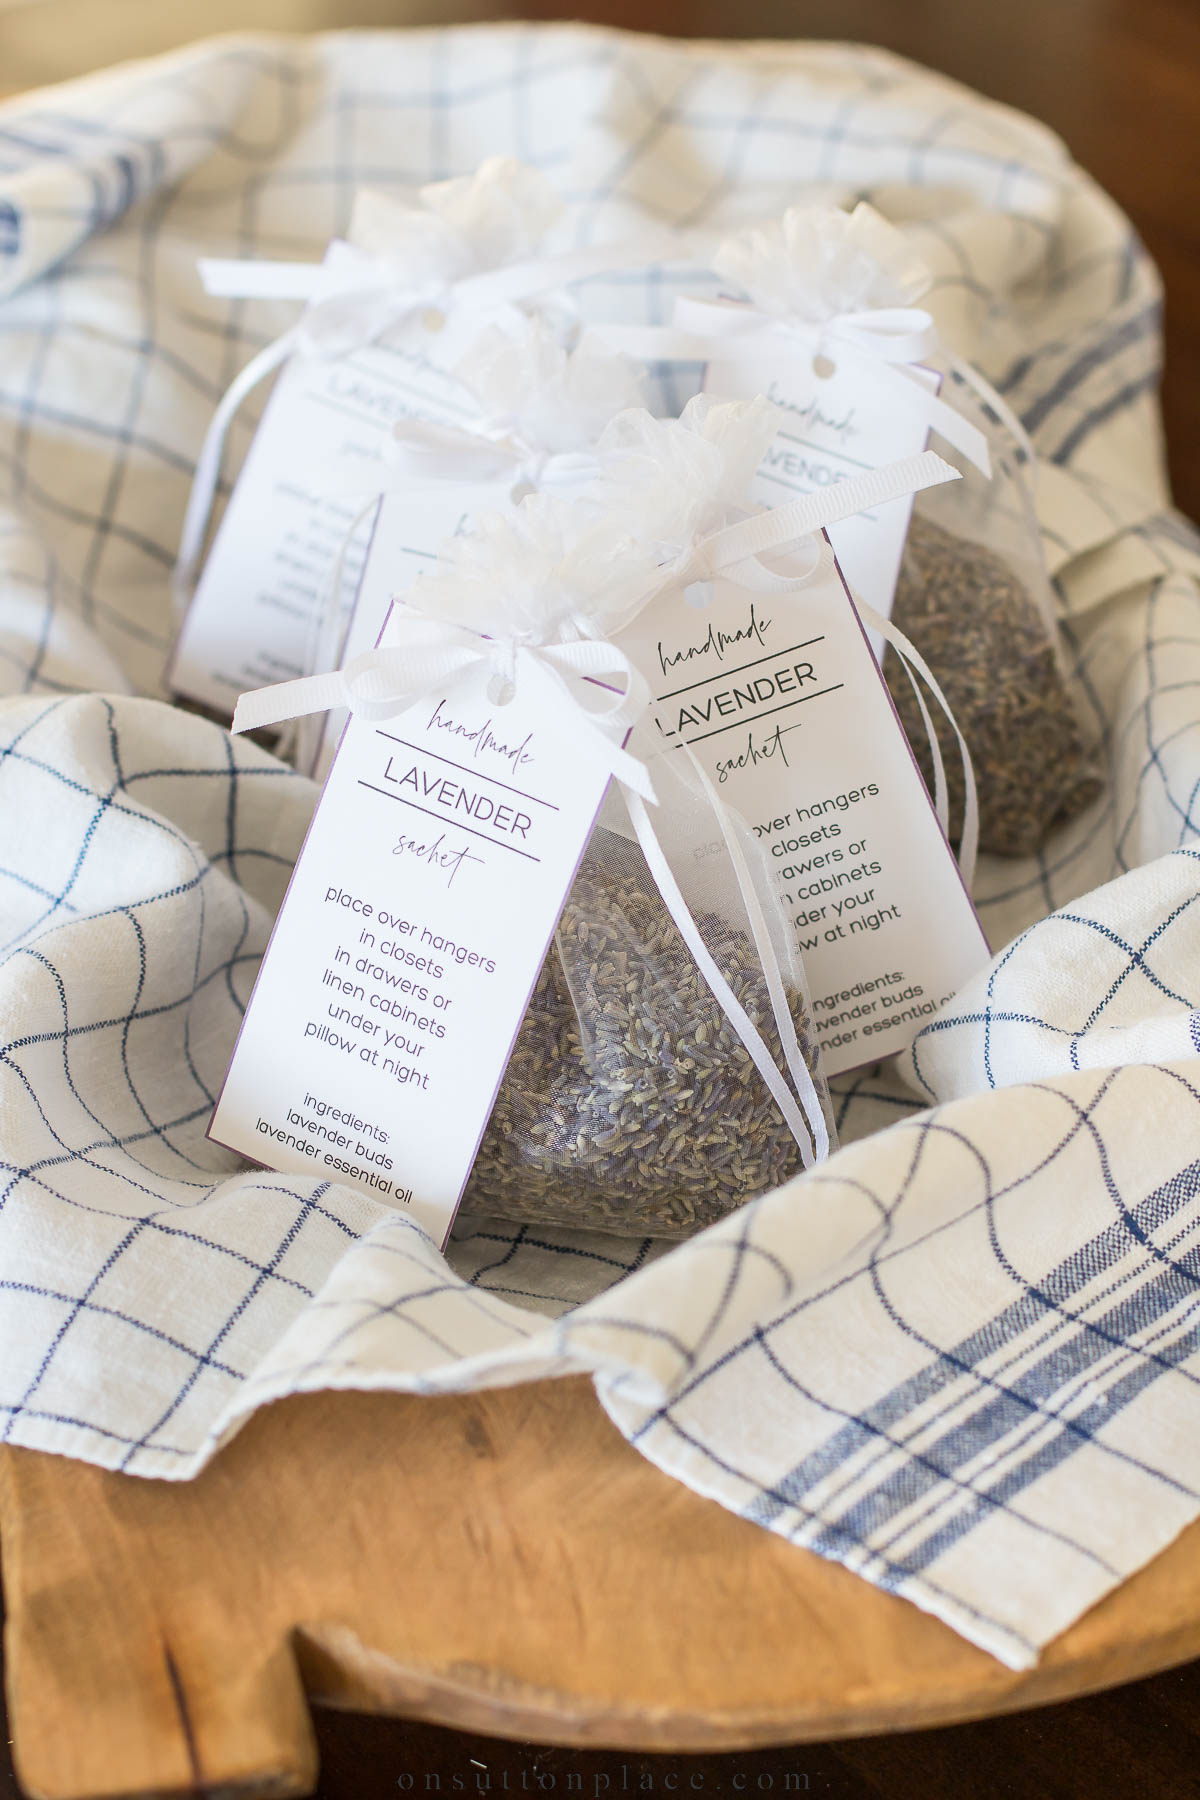 Learn How to Make Gorgeous Paper Sachets That Smell Amazing! 